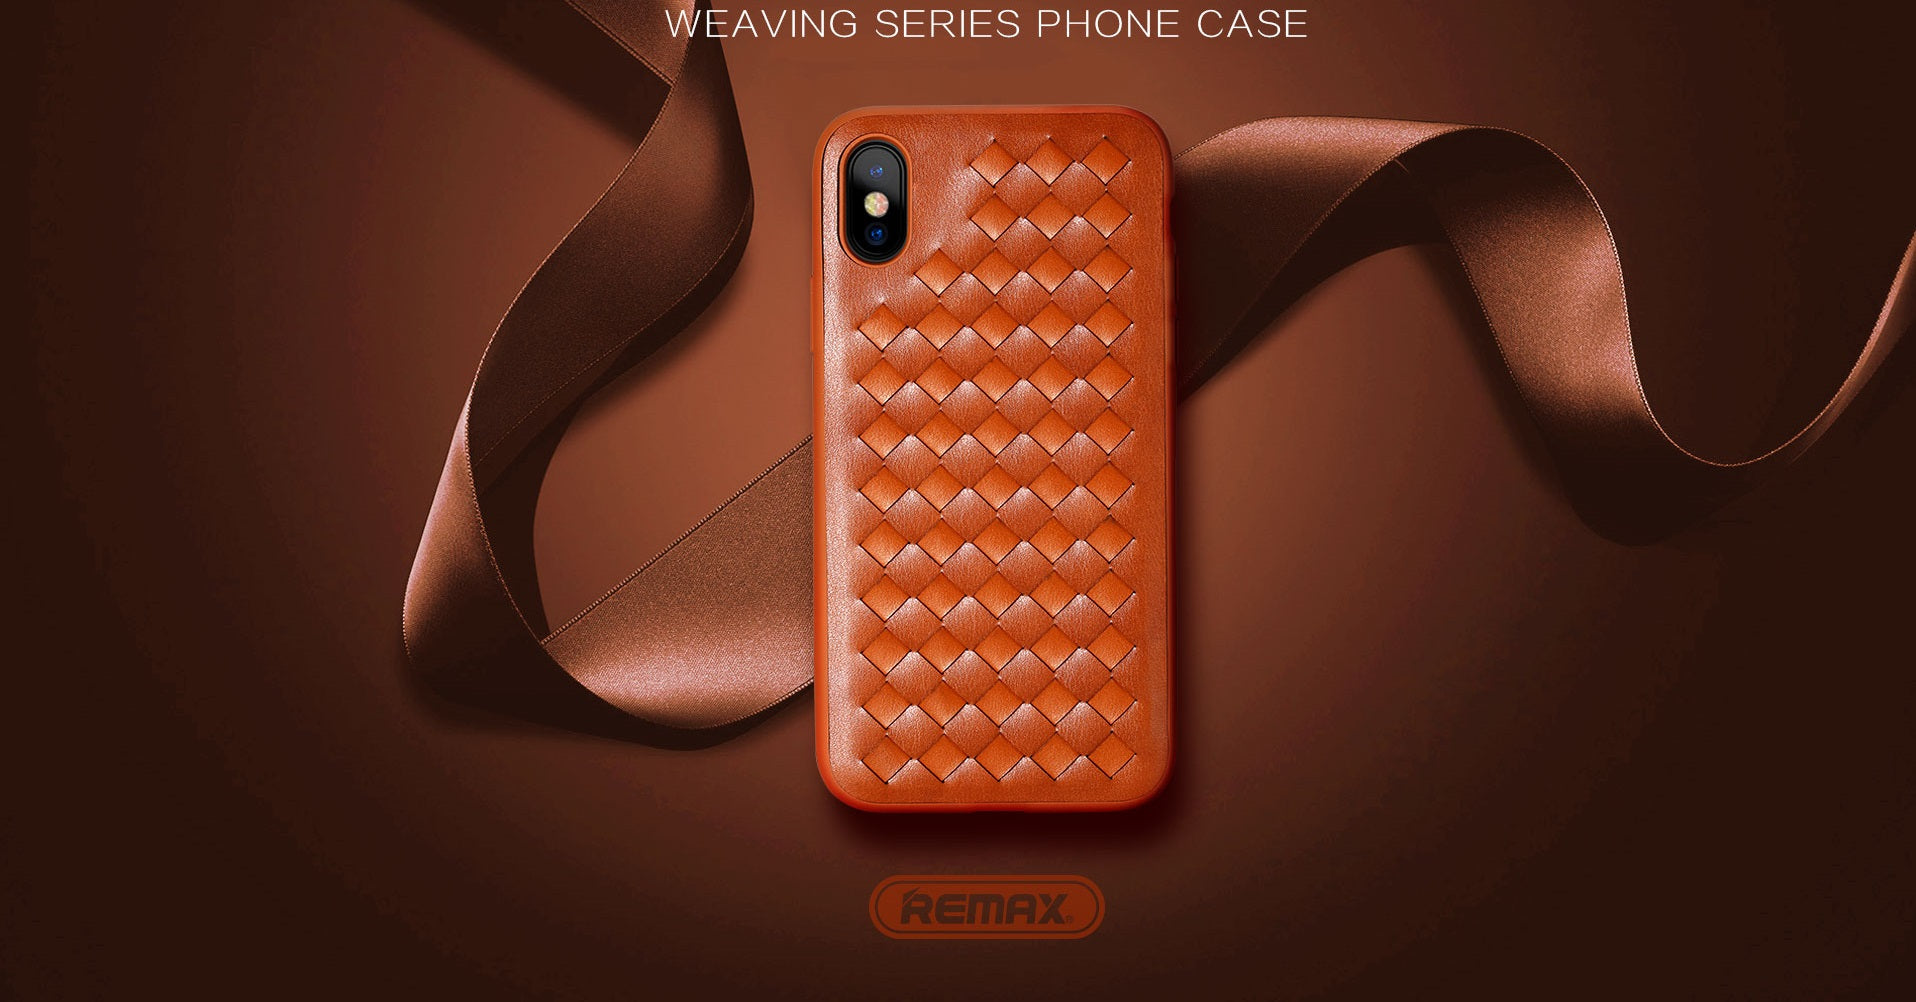 REMAX Official Store - Case Weave iPhone X